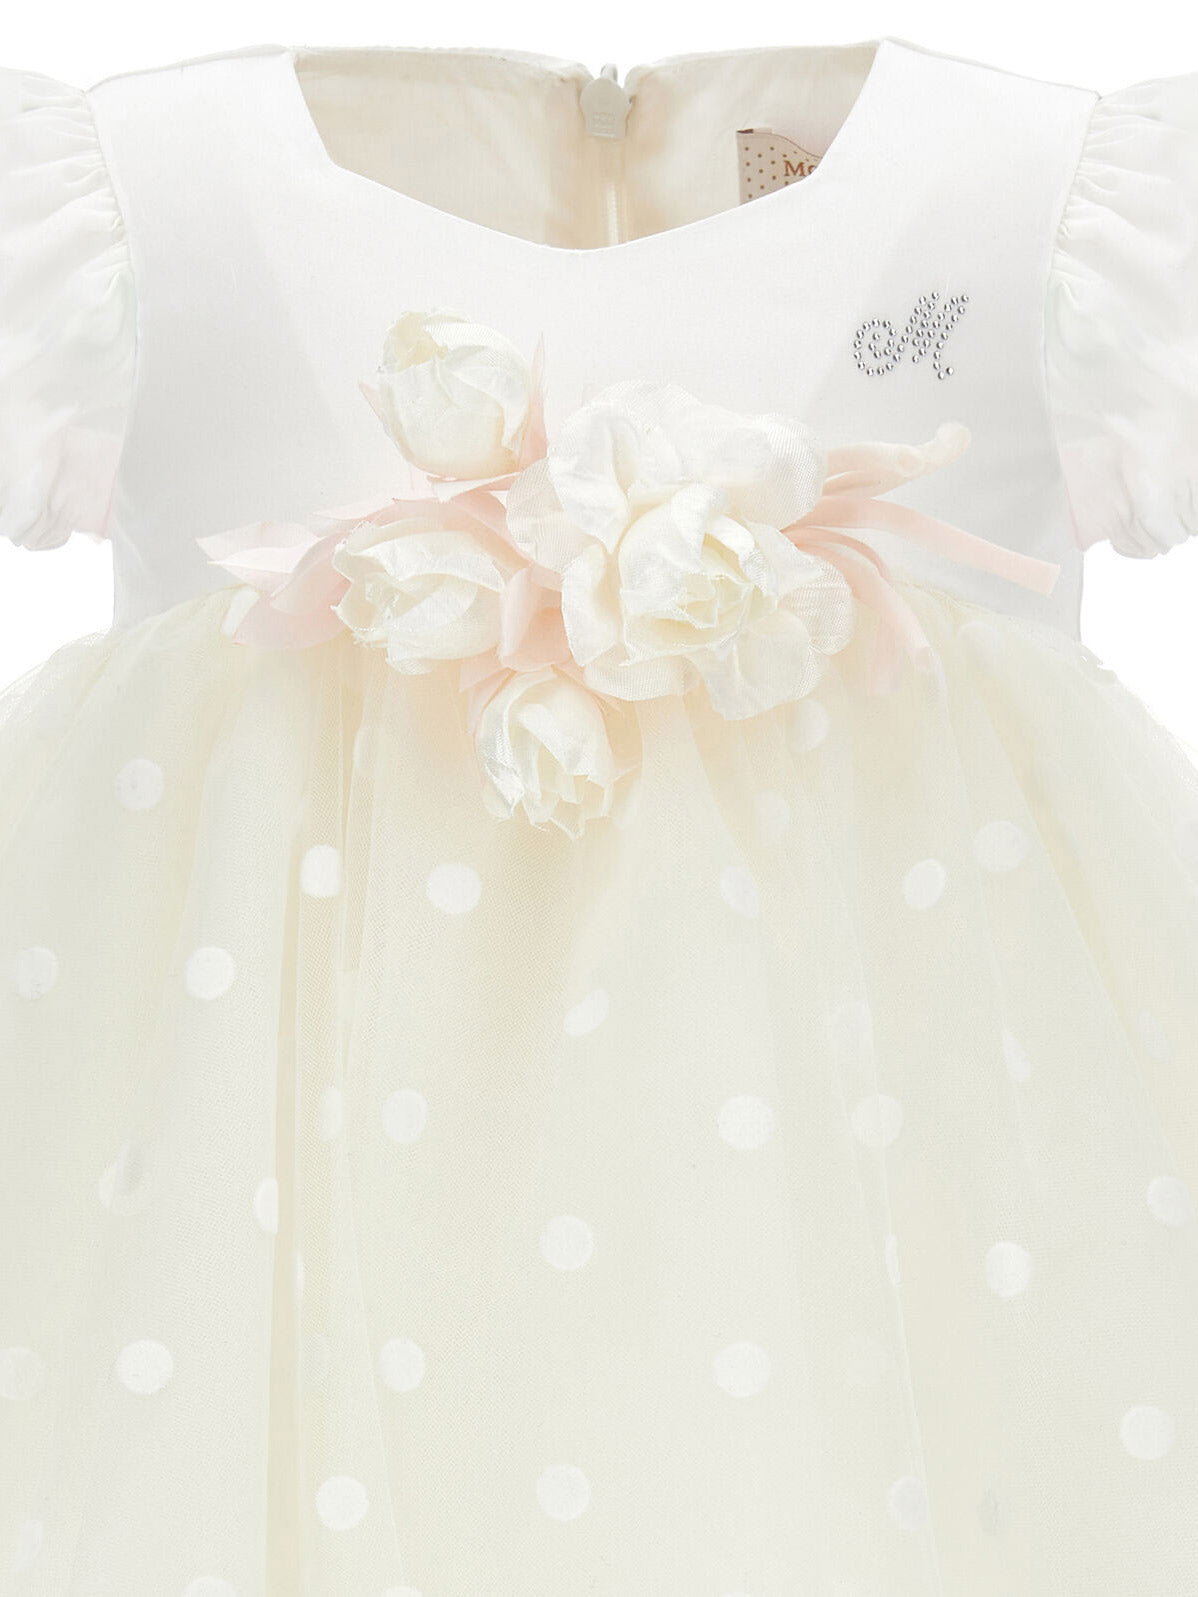 Baby tulle dress with appliquéd flowers